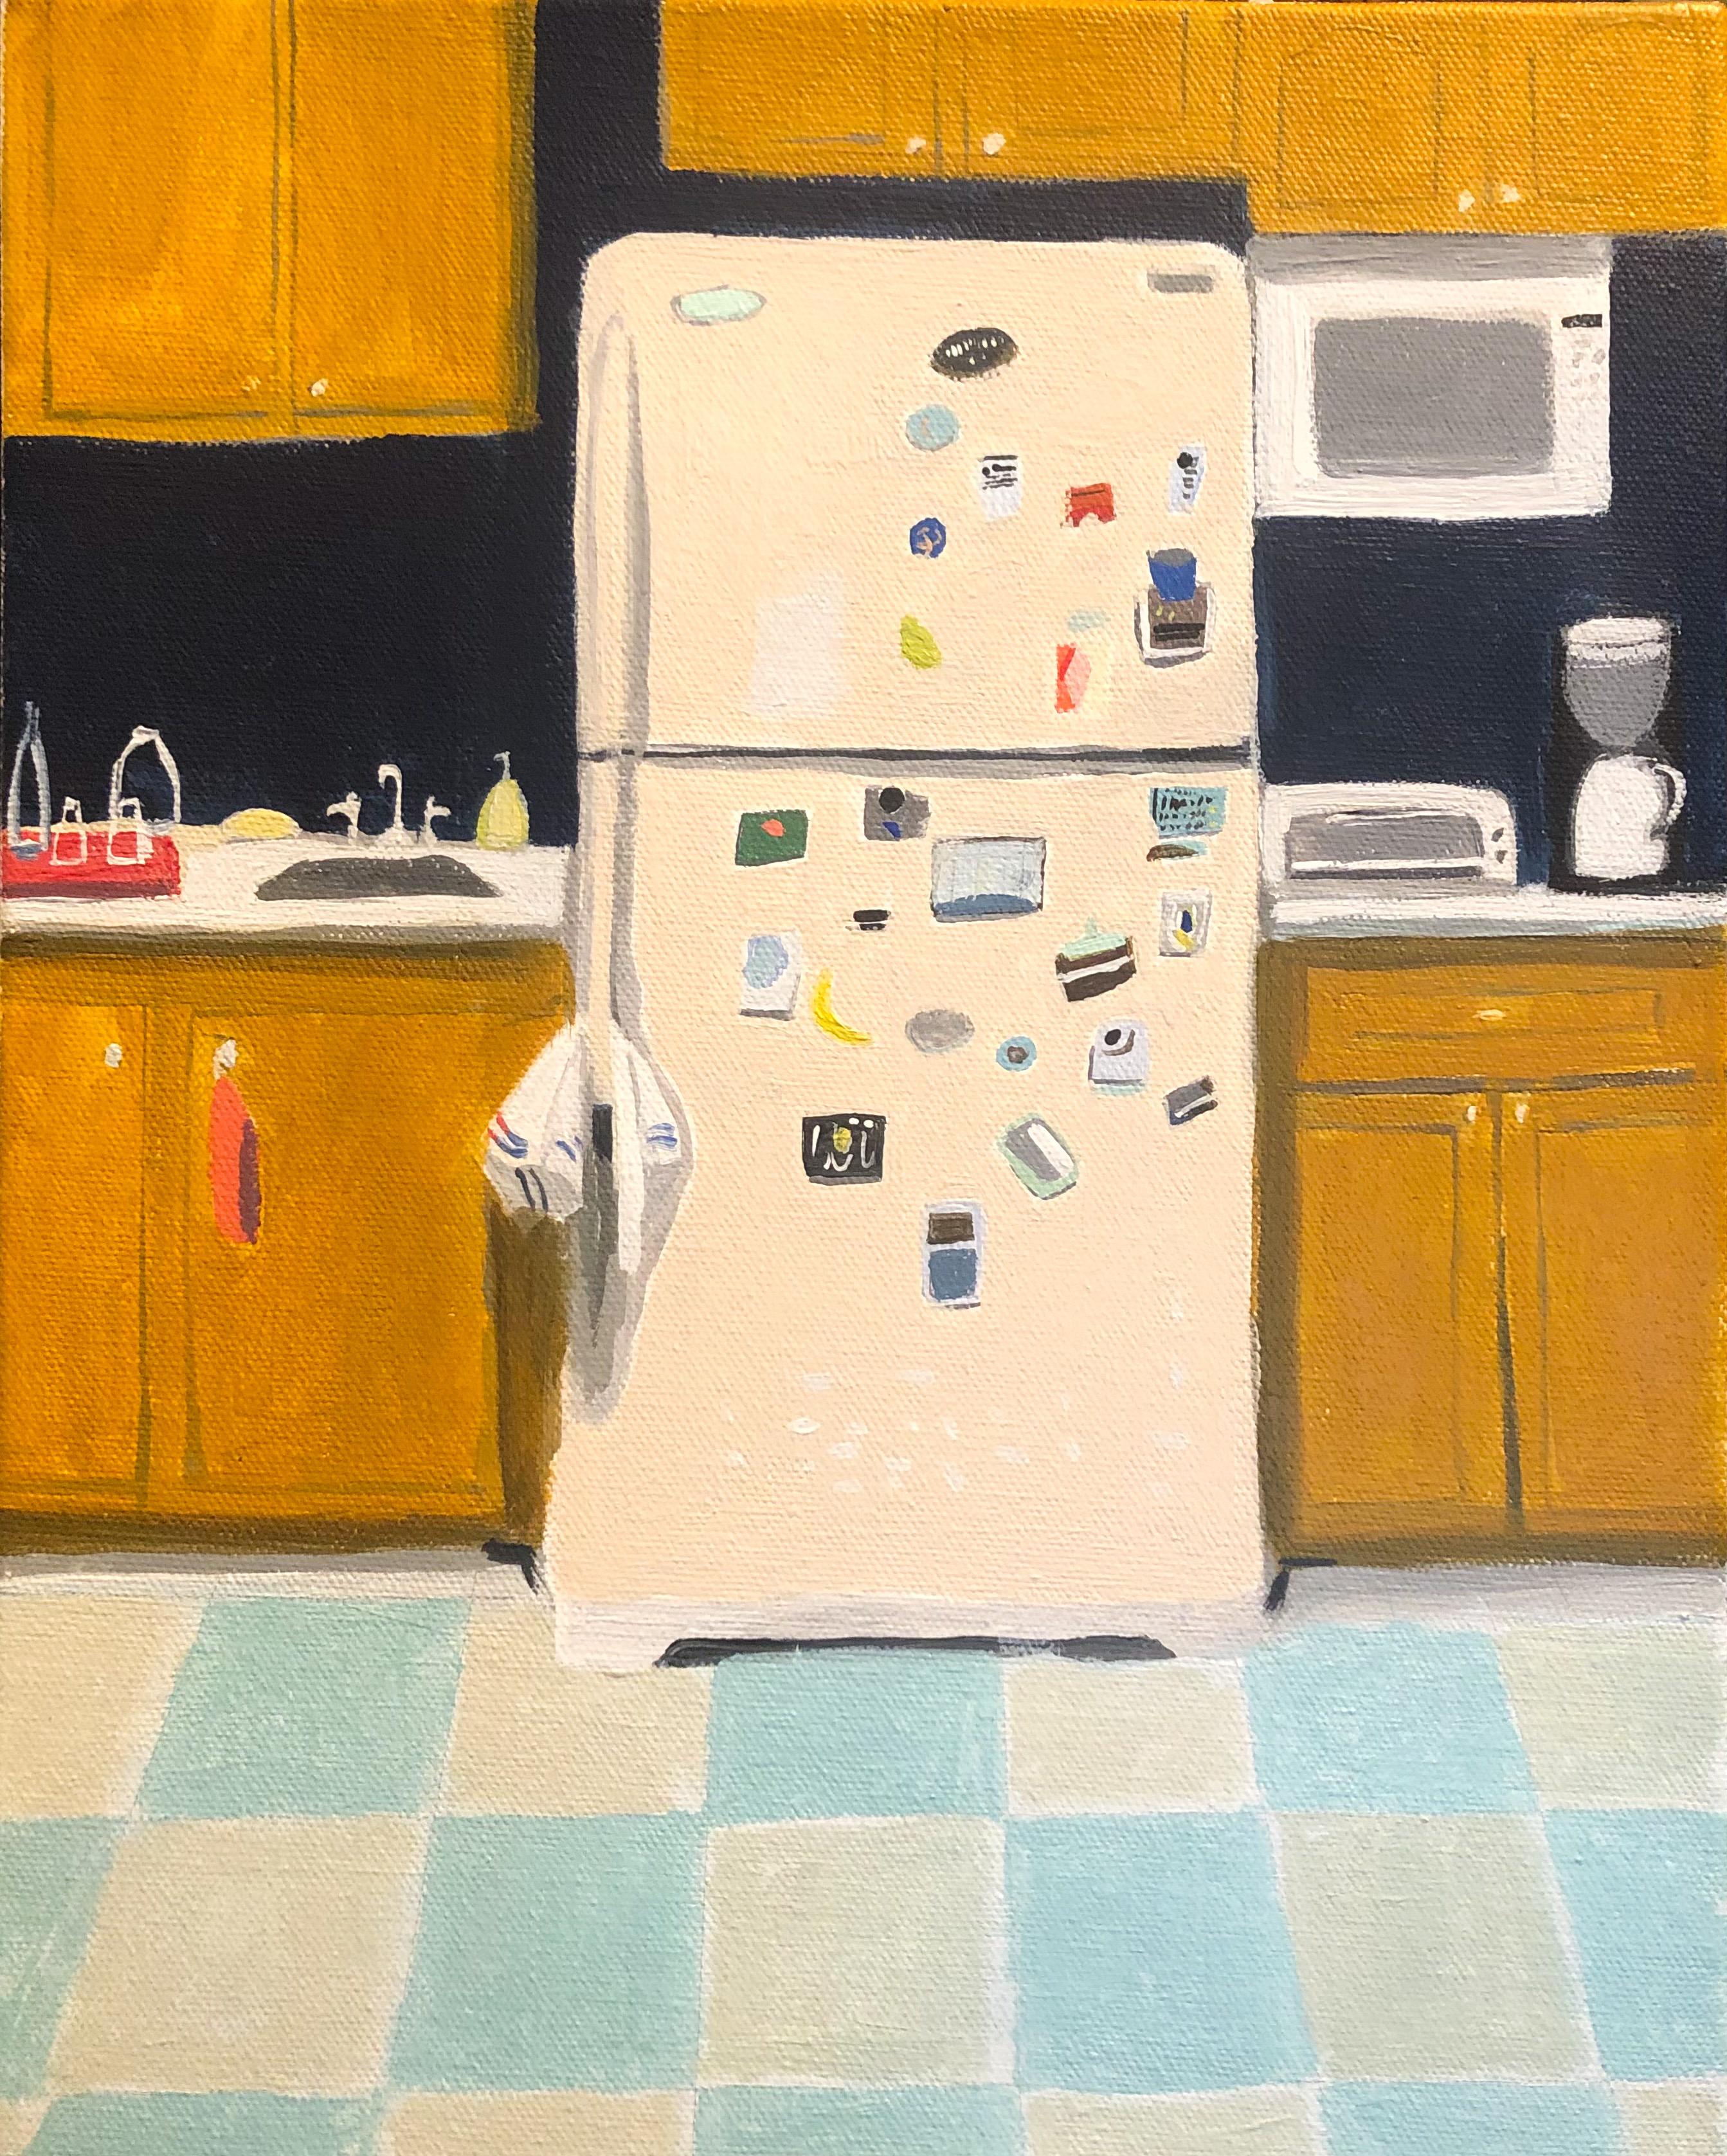 Polly Shindler Interior Painting - Peach Refrigerator, Kitchen Interior, Yellow Wooden Cabinets, Tiled Floor